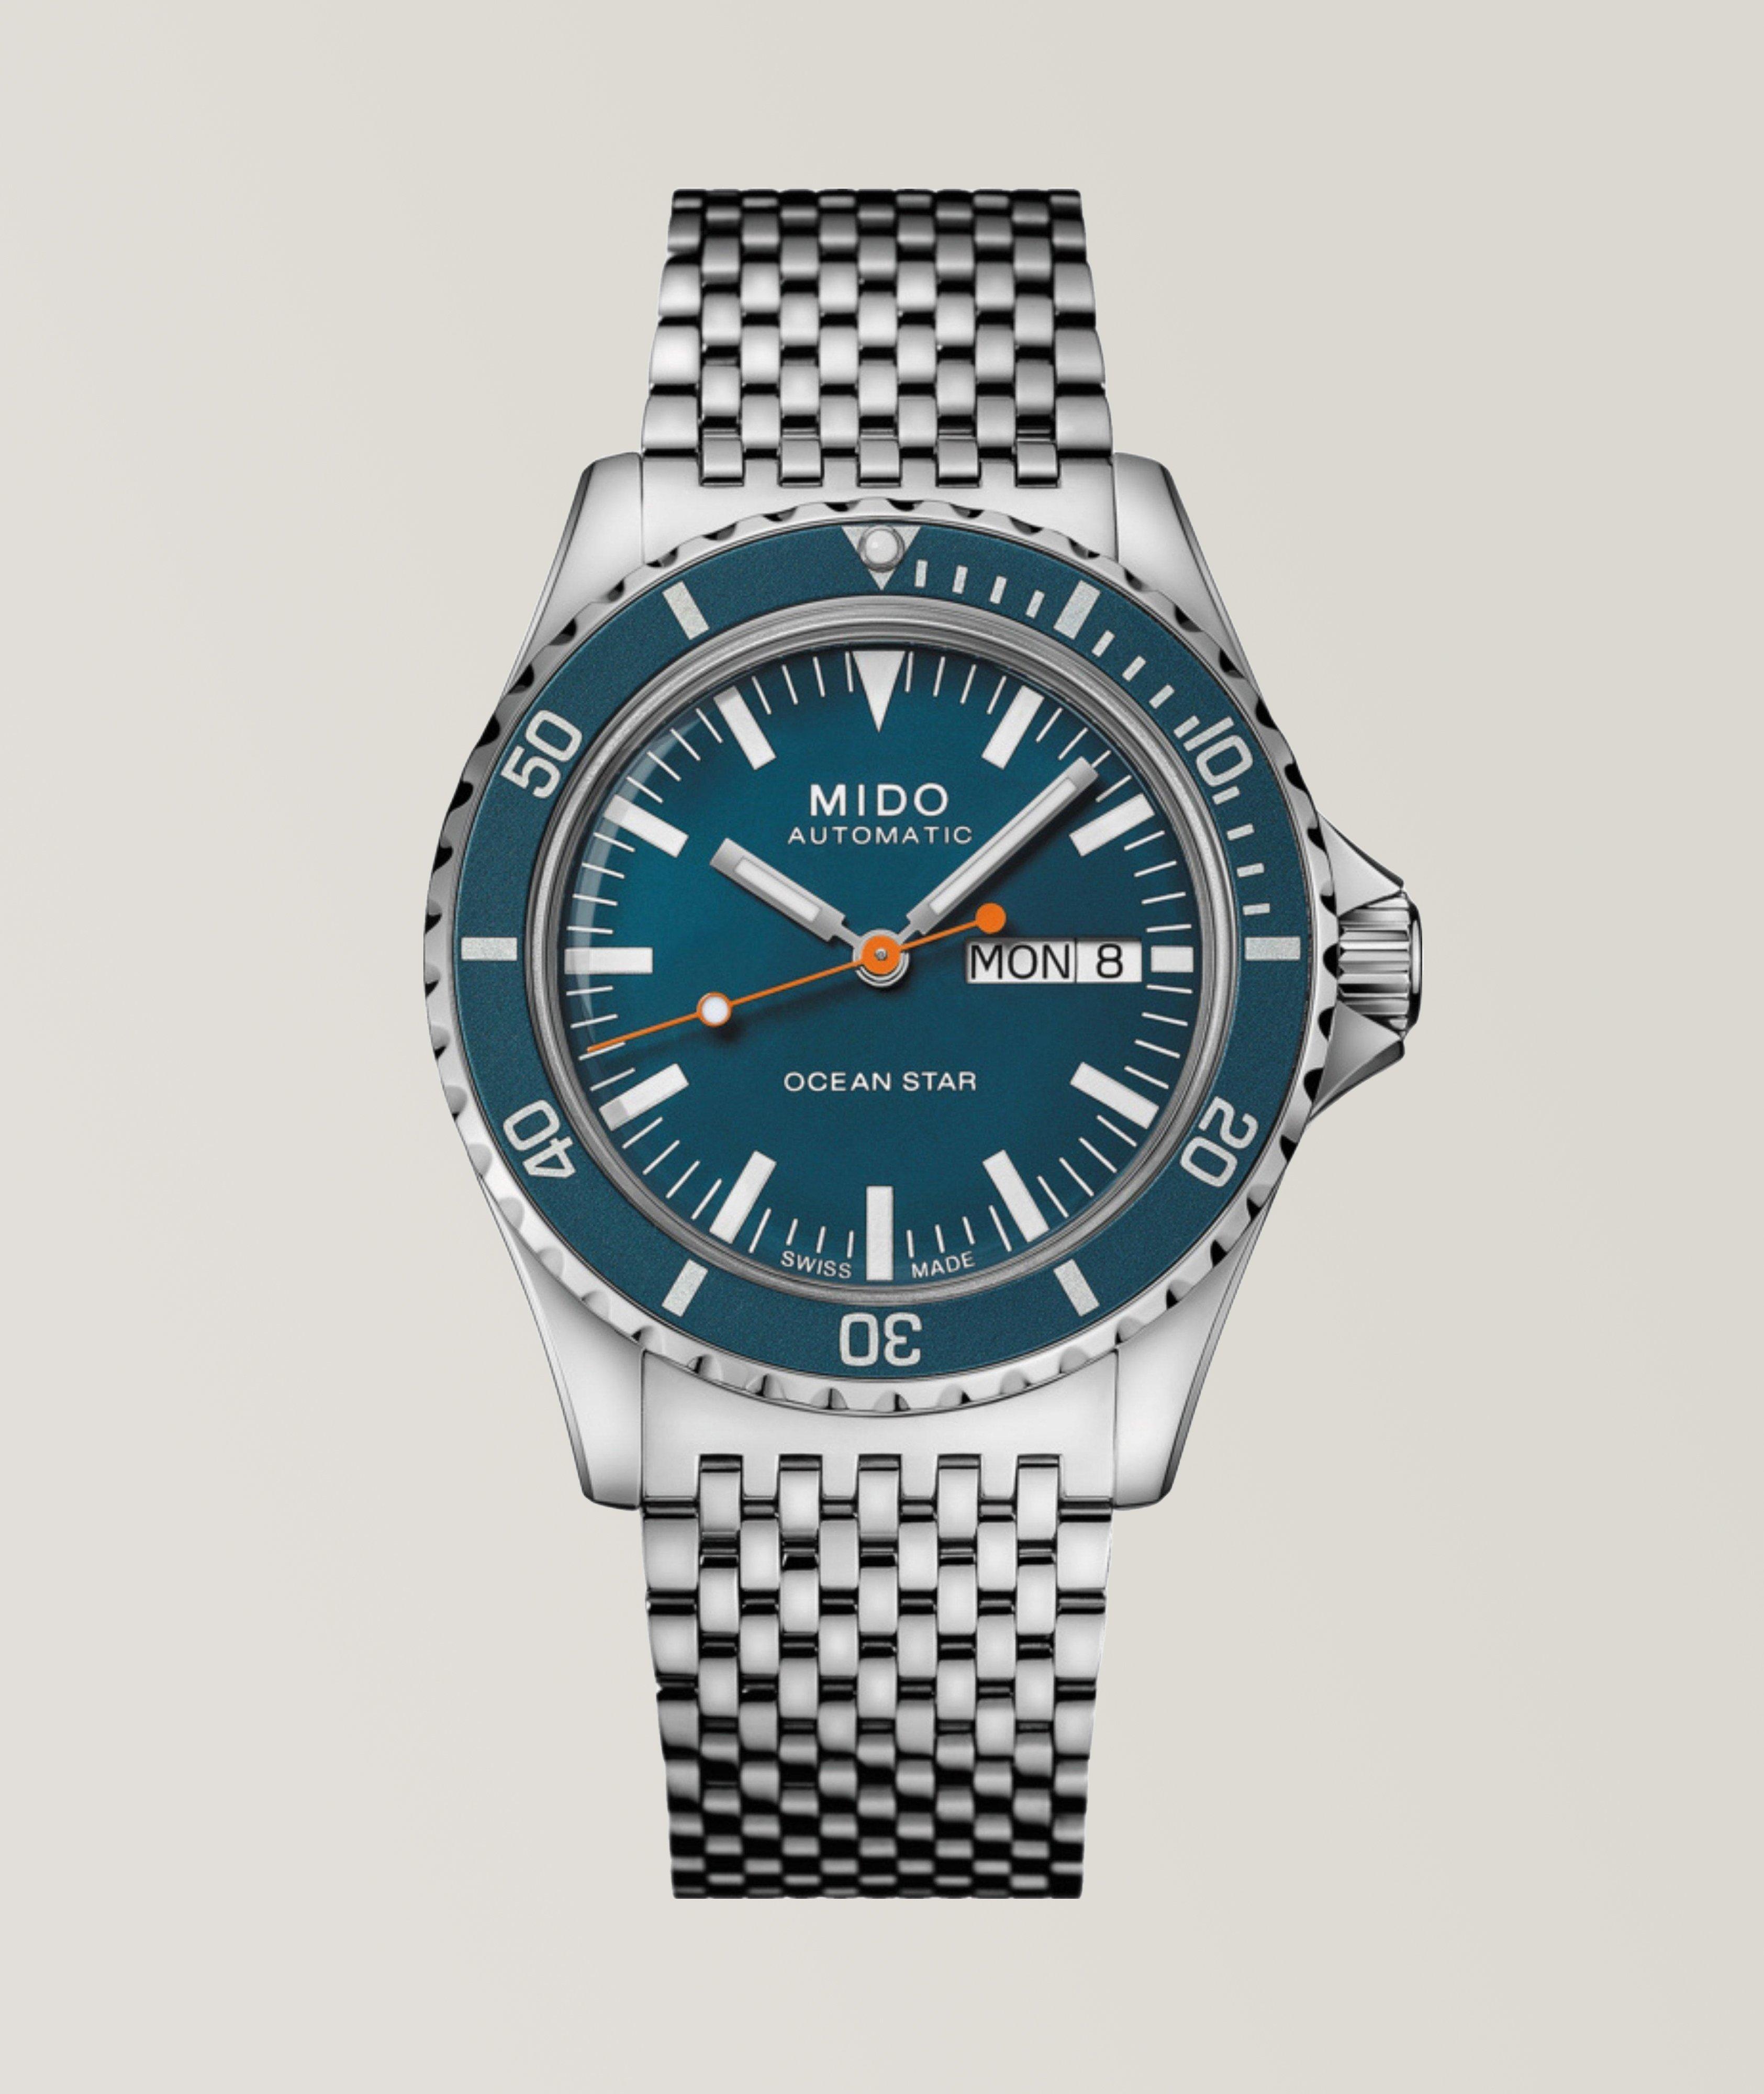 Mido Montre hommage, collection Ocean Star